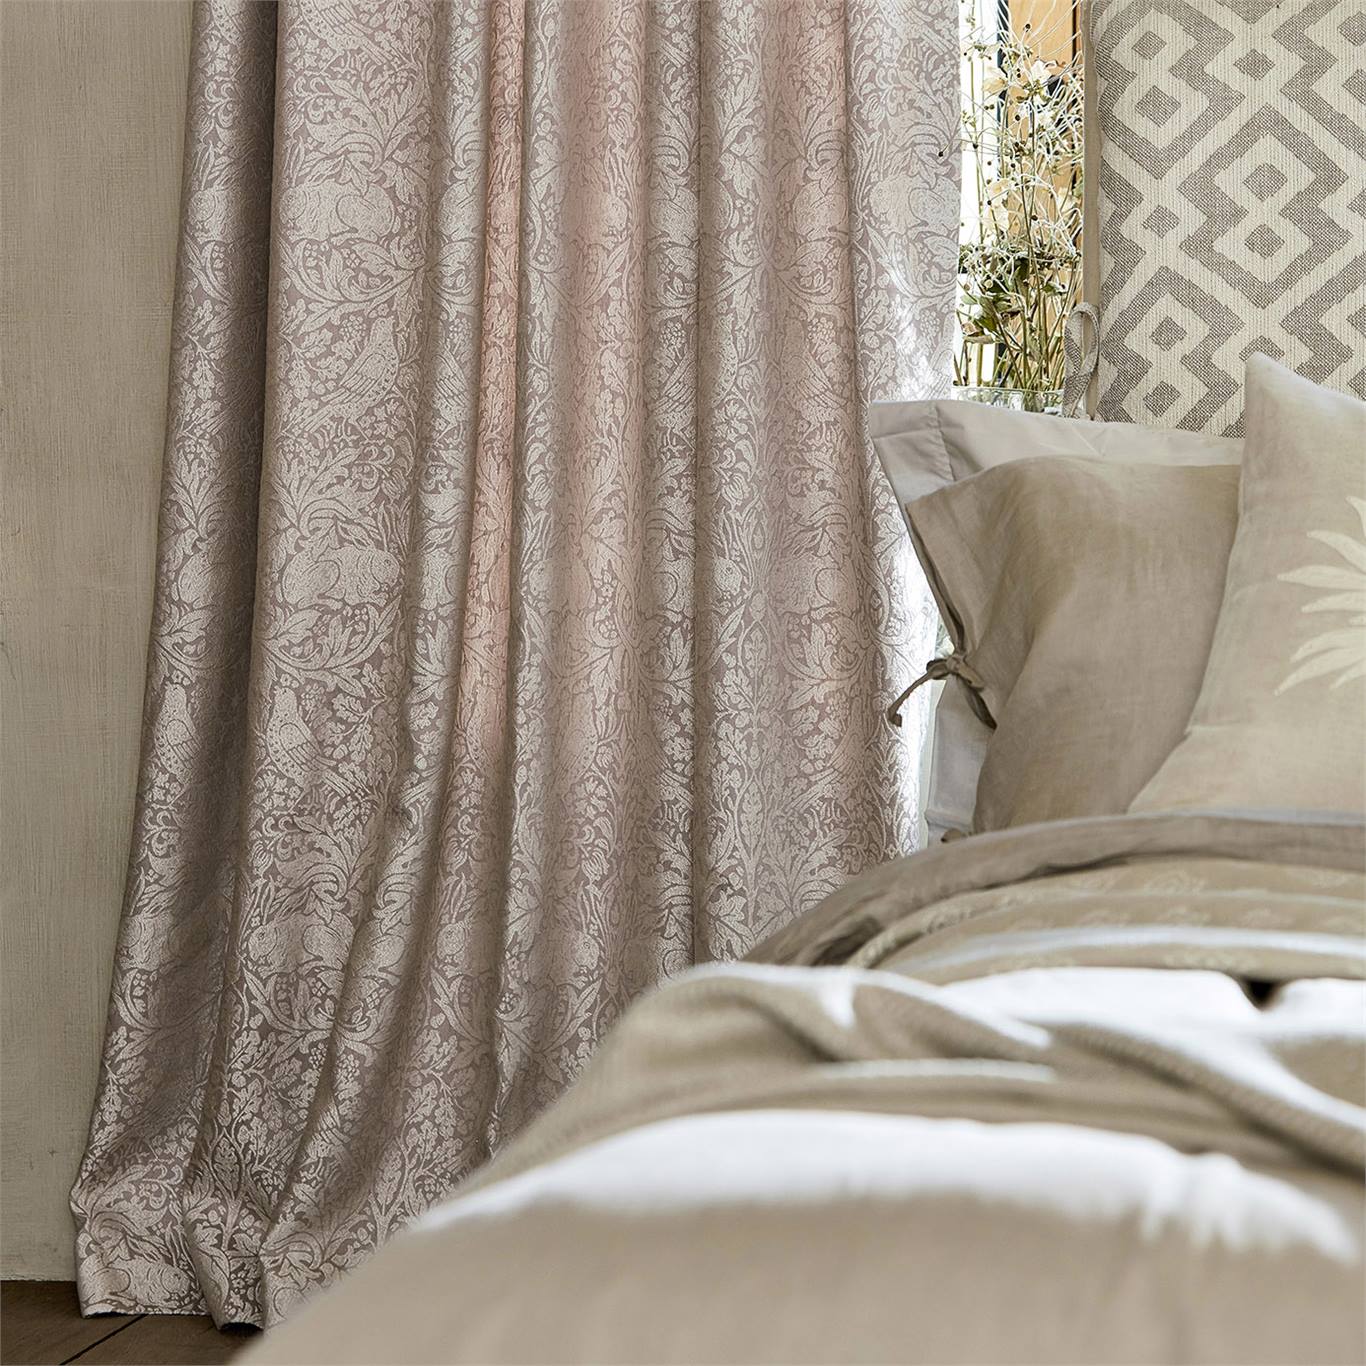 'Pure Brer Rabbit' in soft pink, as curtains behind a bed